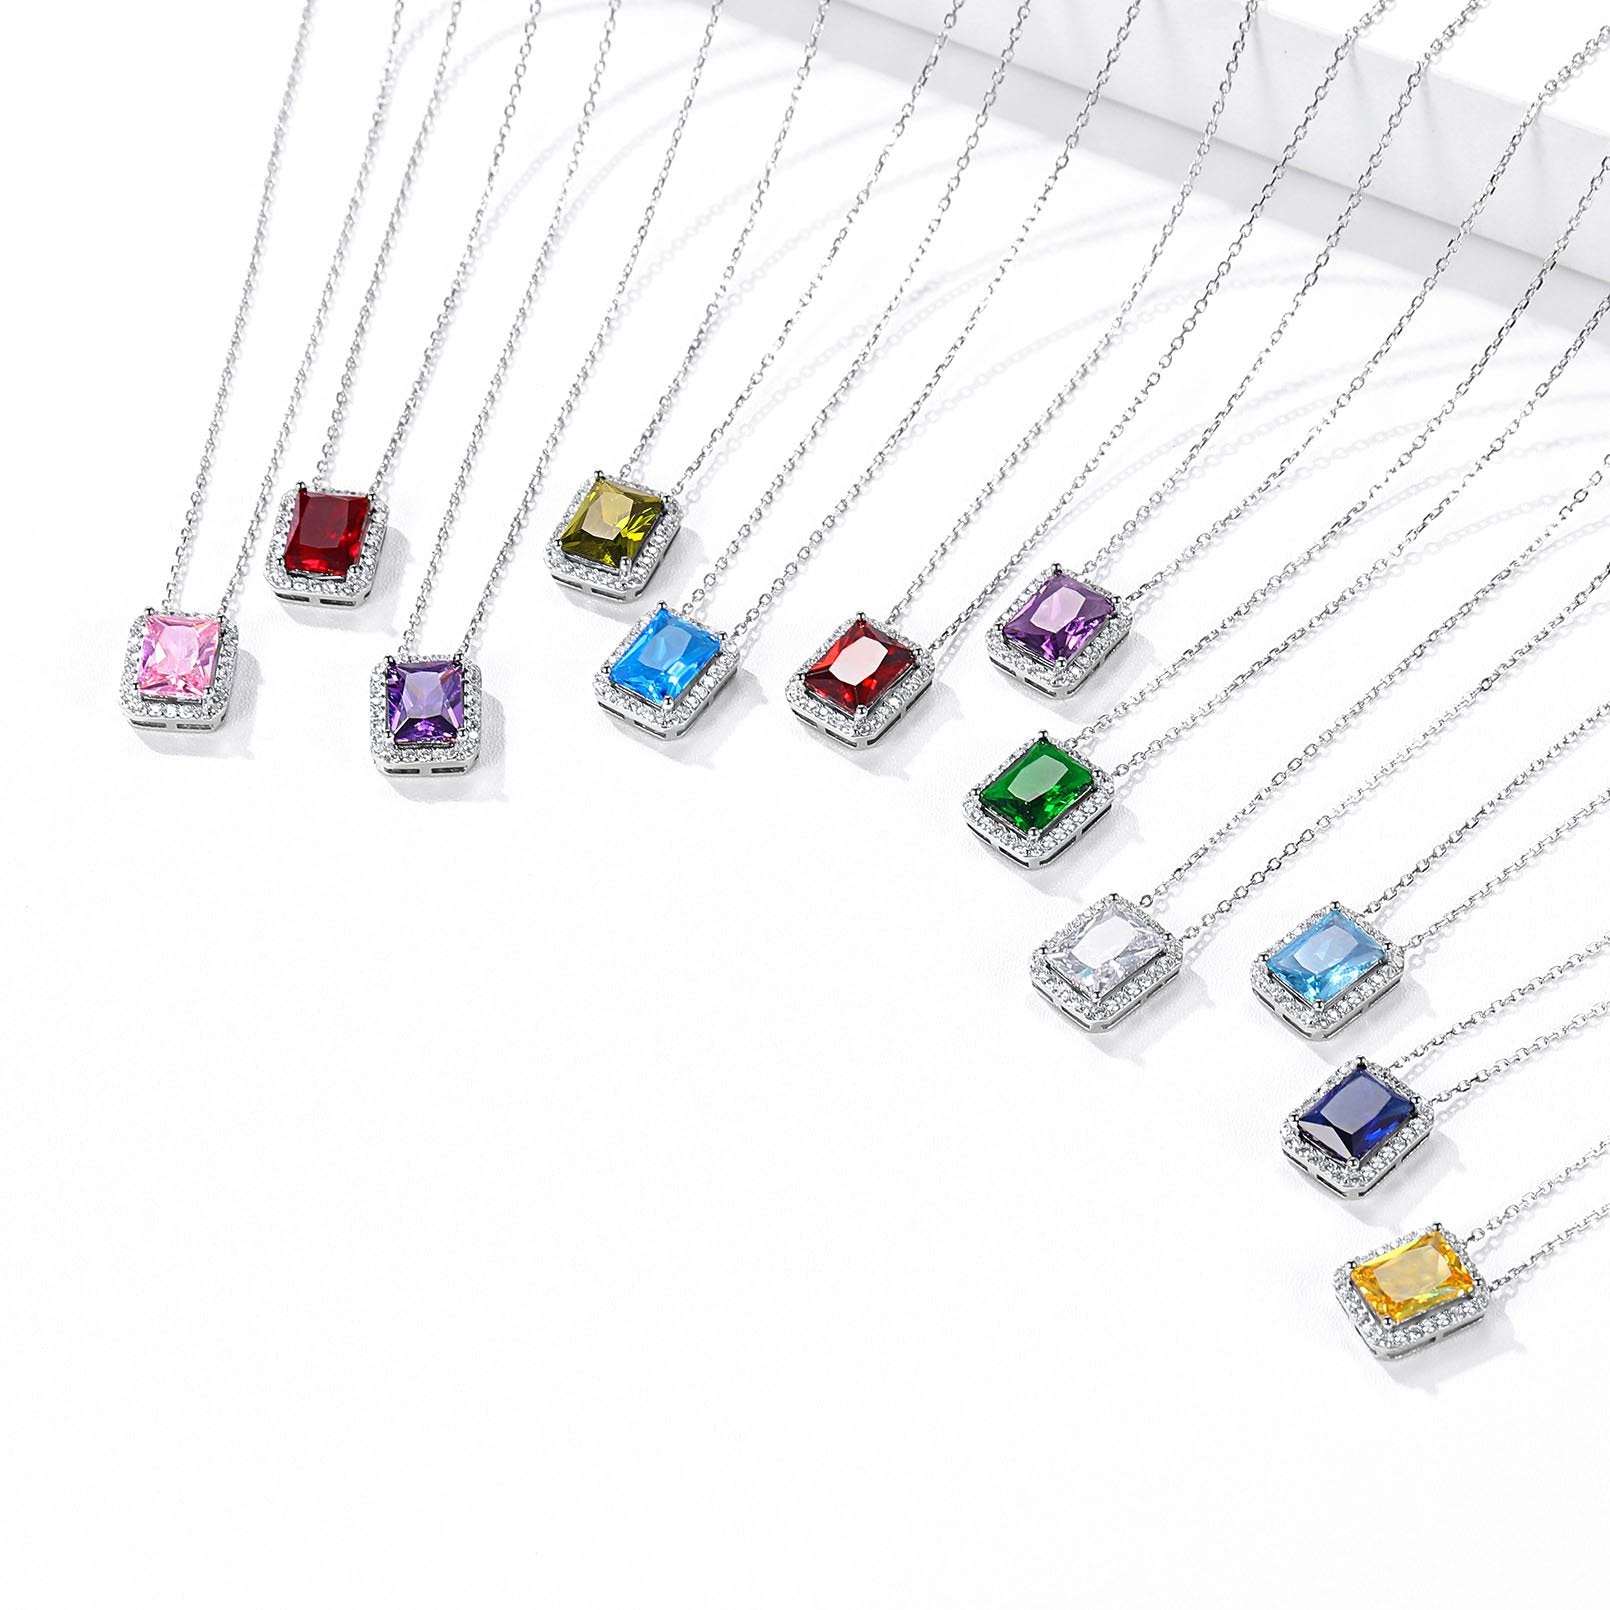 Sterling Silver Halo Necklace April Birthstone Emerald-Cut Pendant BIRTHSTONES JEWELRY